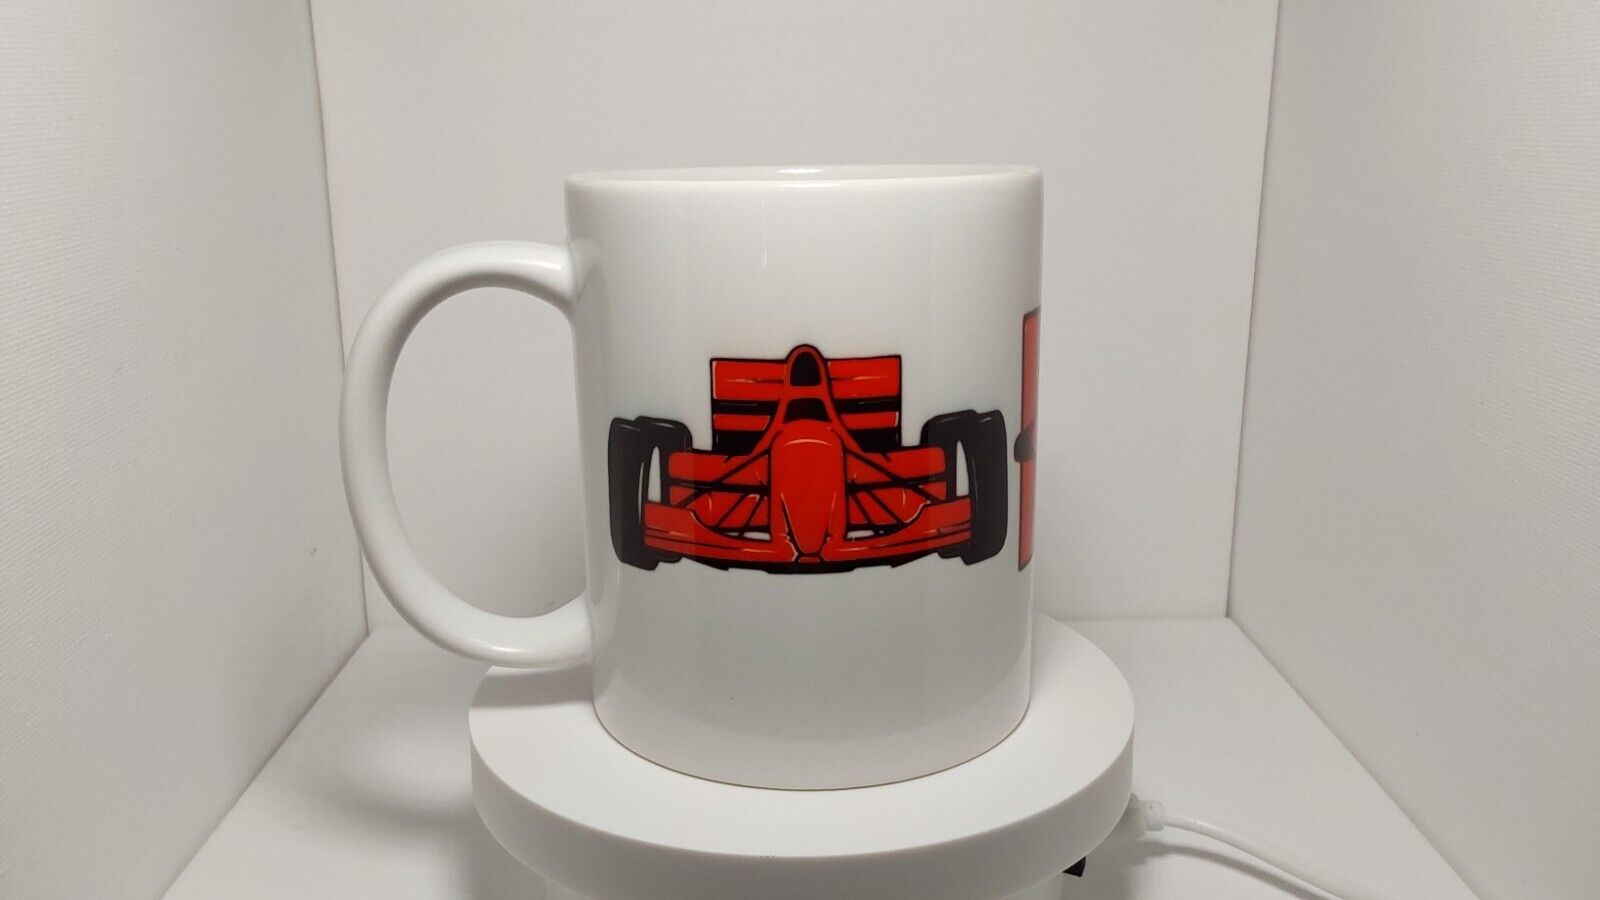 Handmade Indy racing red and black mug. Perfect for any open wheel race fan Indy